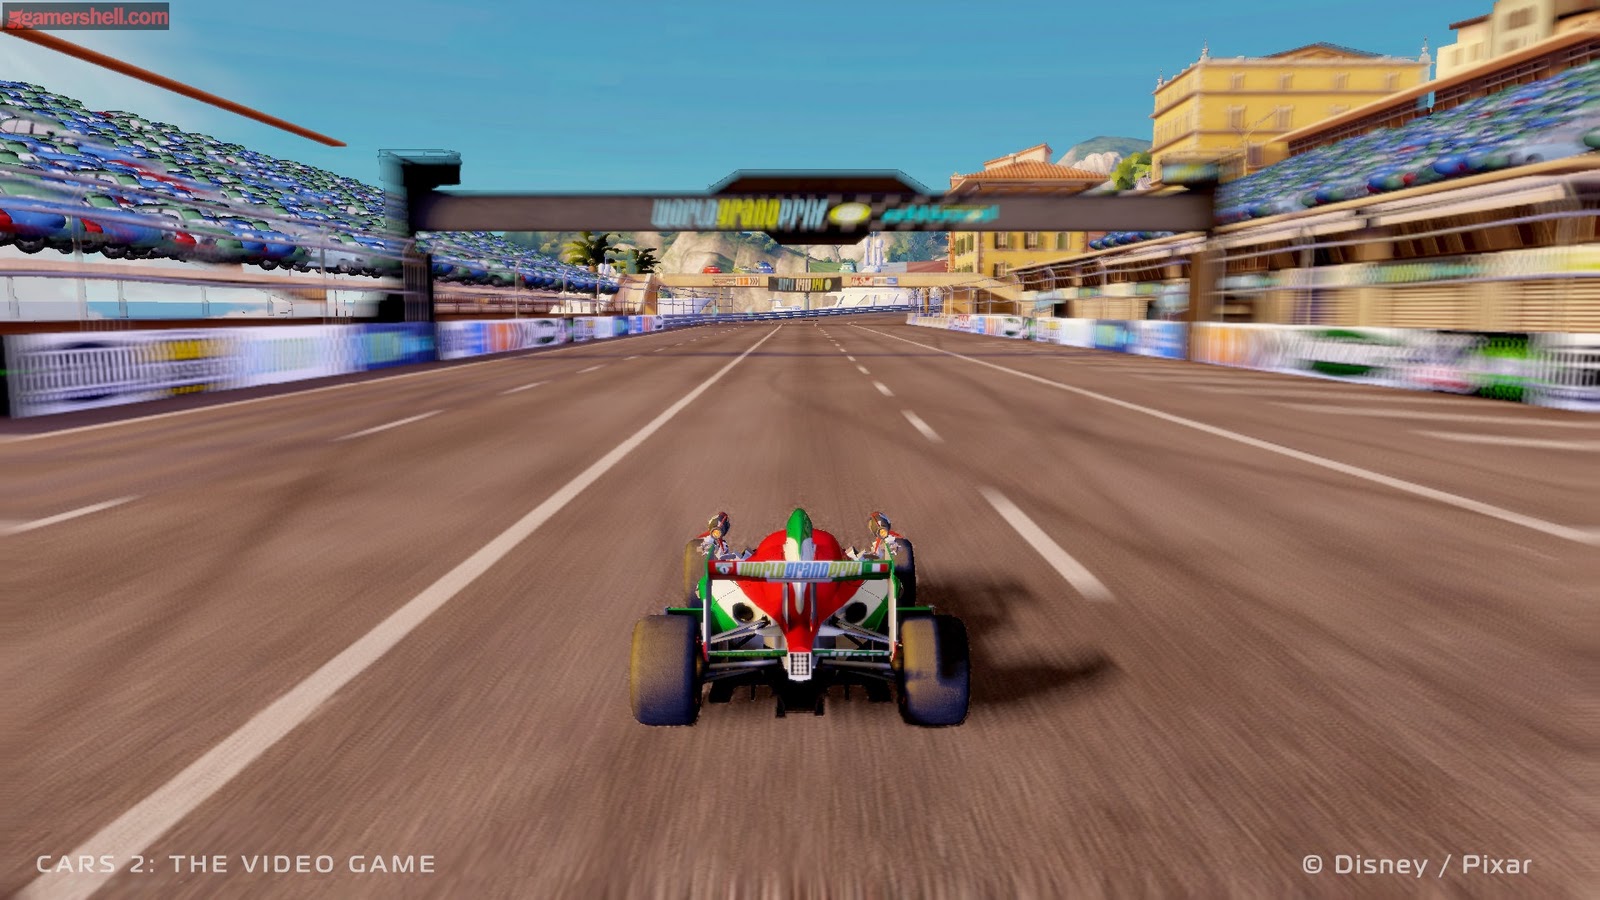 Download FREE Cars 2 The Video Game PC Game Full Version